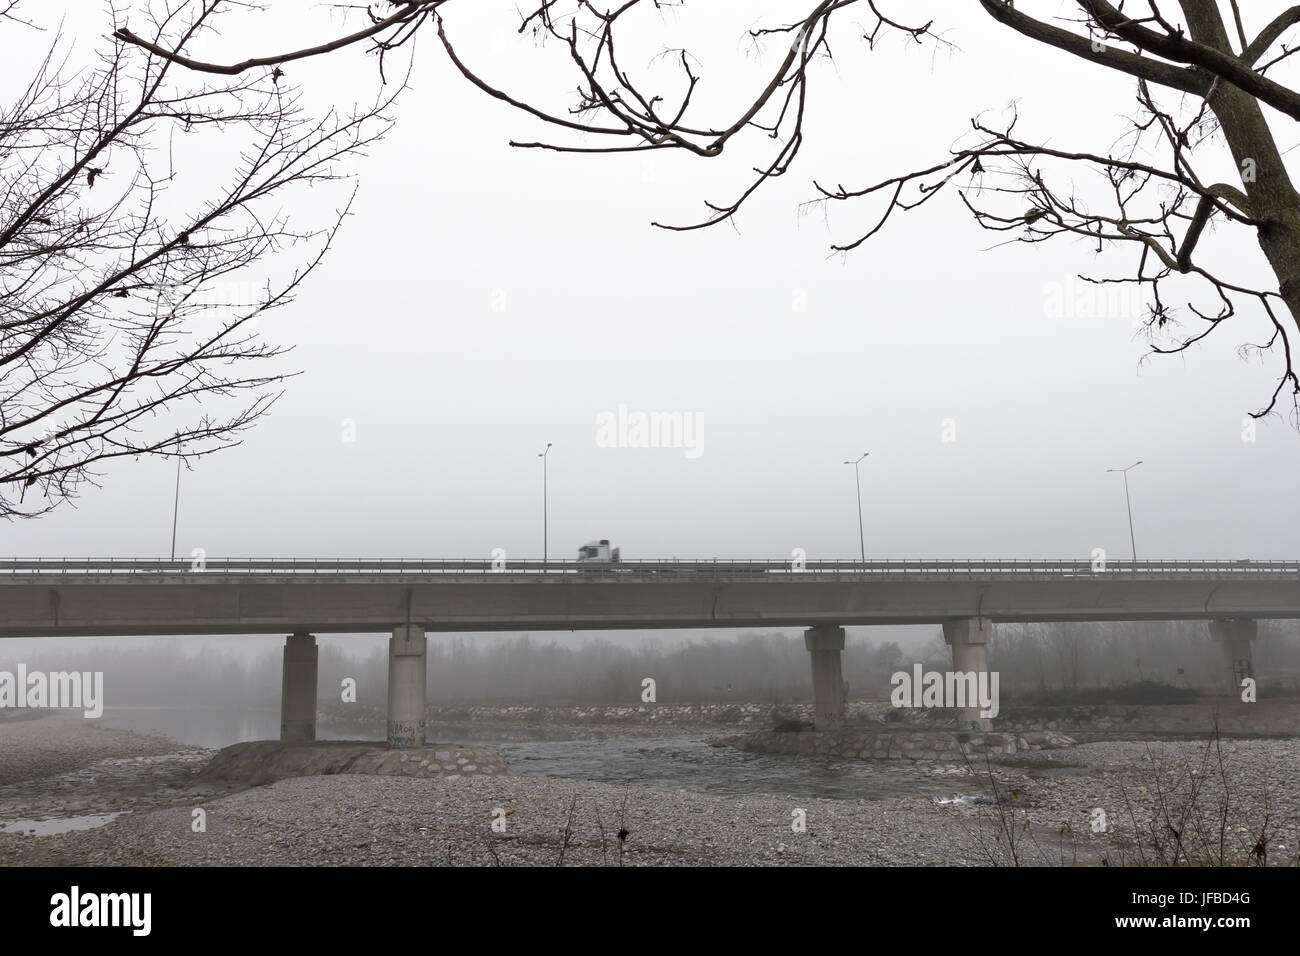 Elevated highway in mystery fog Stock Photo